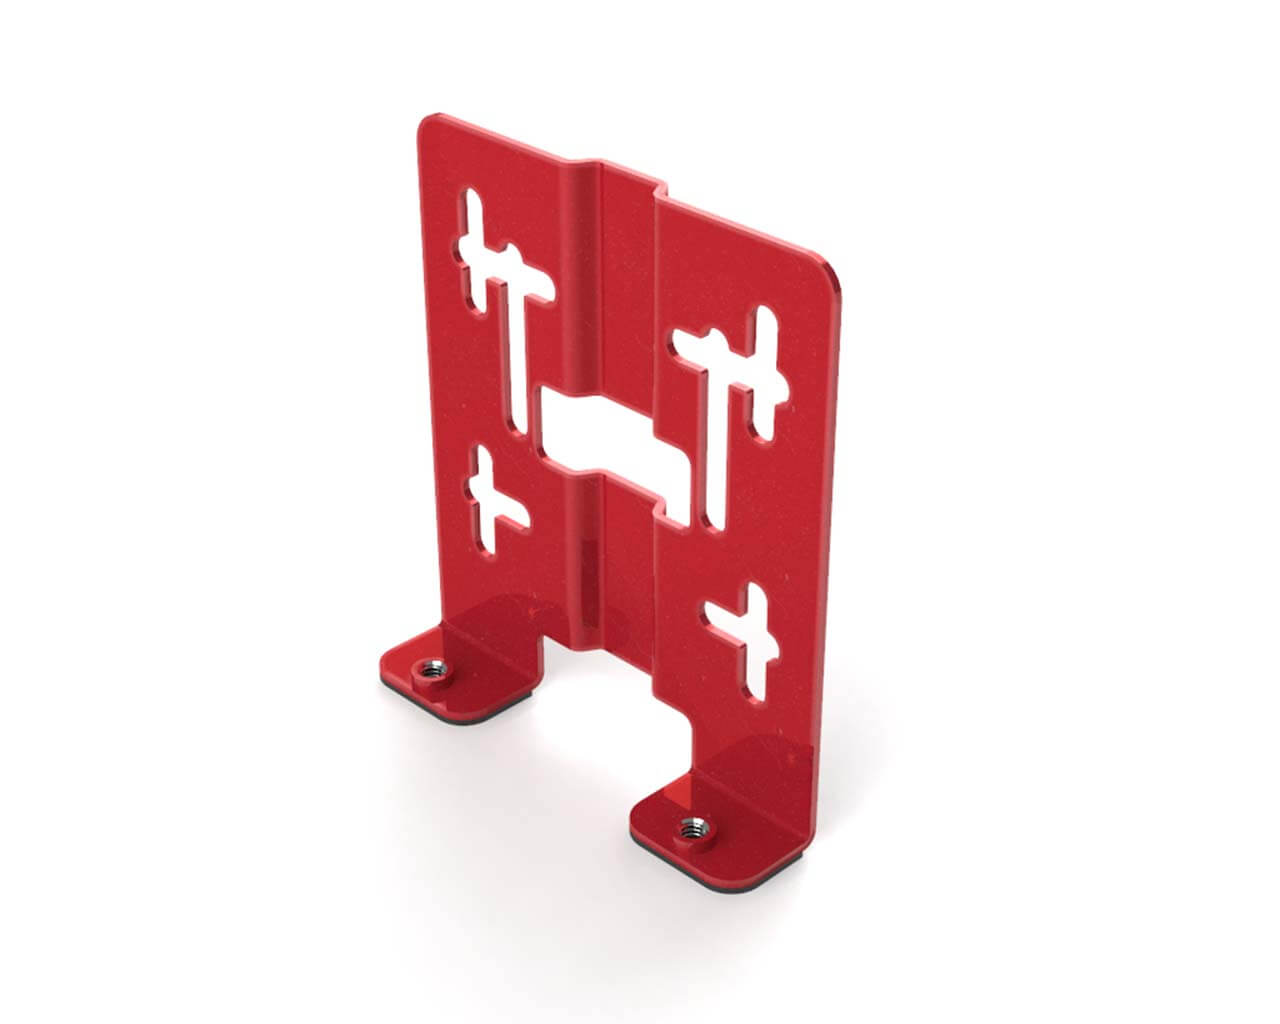 PrimoChill SX Universal Res/Pump Mount Bracket - PrimoChill - KEEPING IT COOL Candy Red